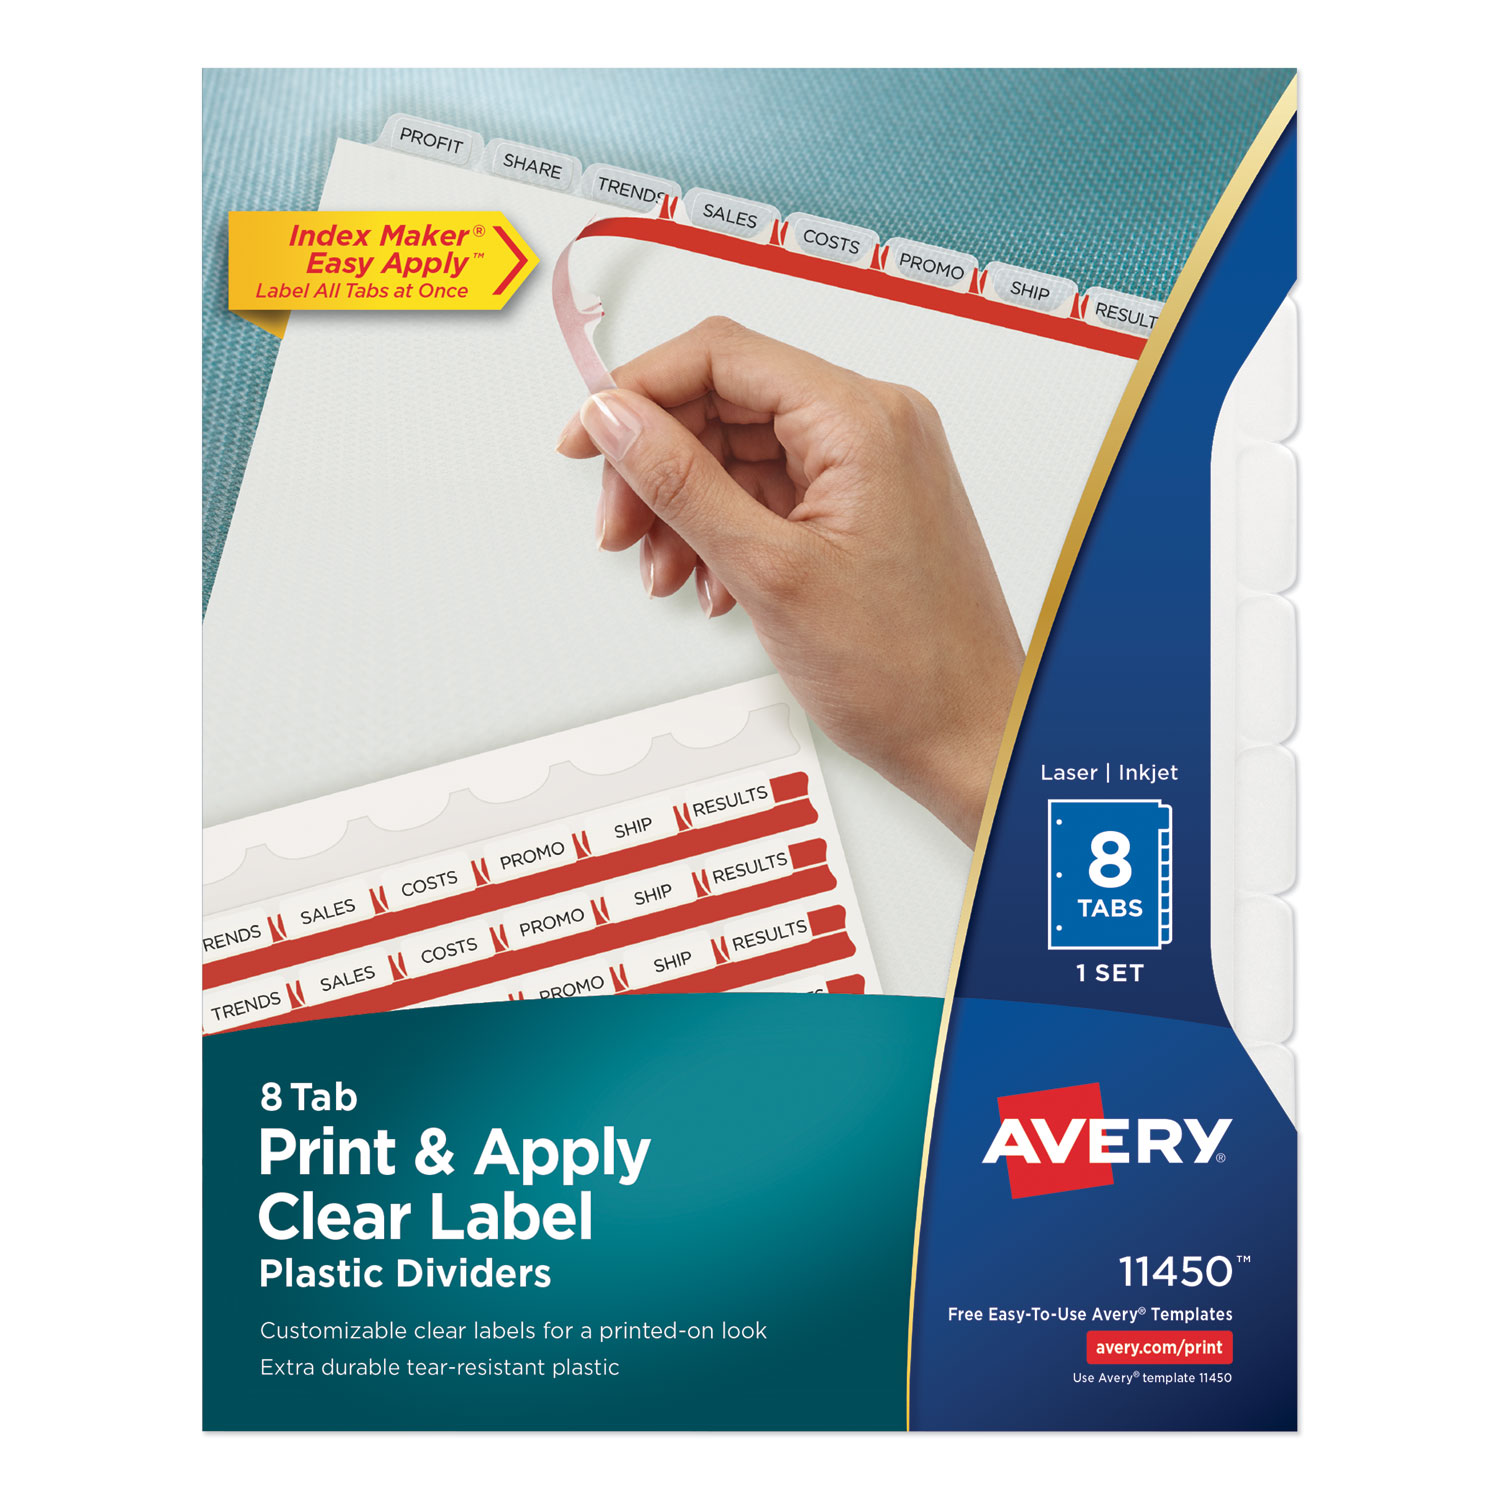  Avery 11450 Print and Apply Index Maker Clear Label Plastic Dividers with Printable Label Strip, 8-Tab, 11 x 8.5, Translucent, 1 Set (AVE11450) 